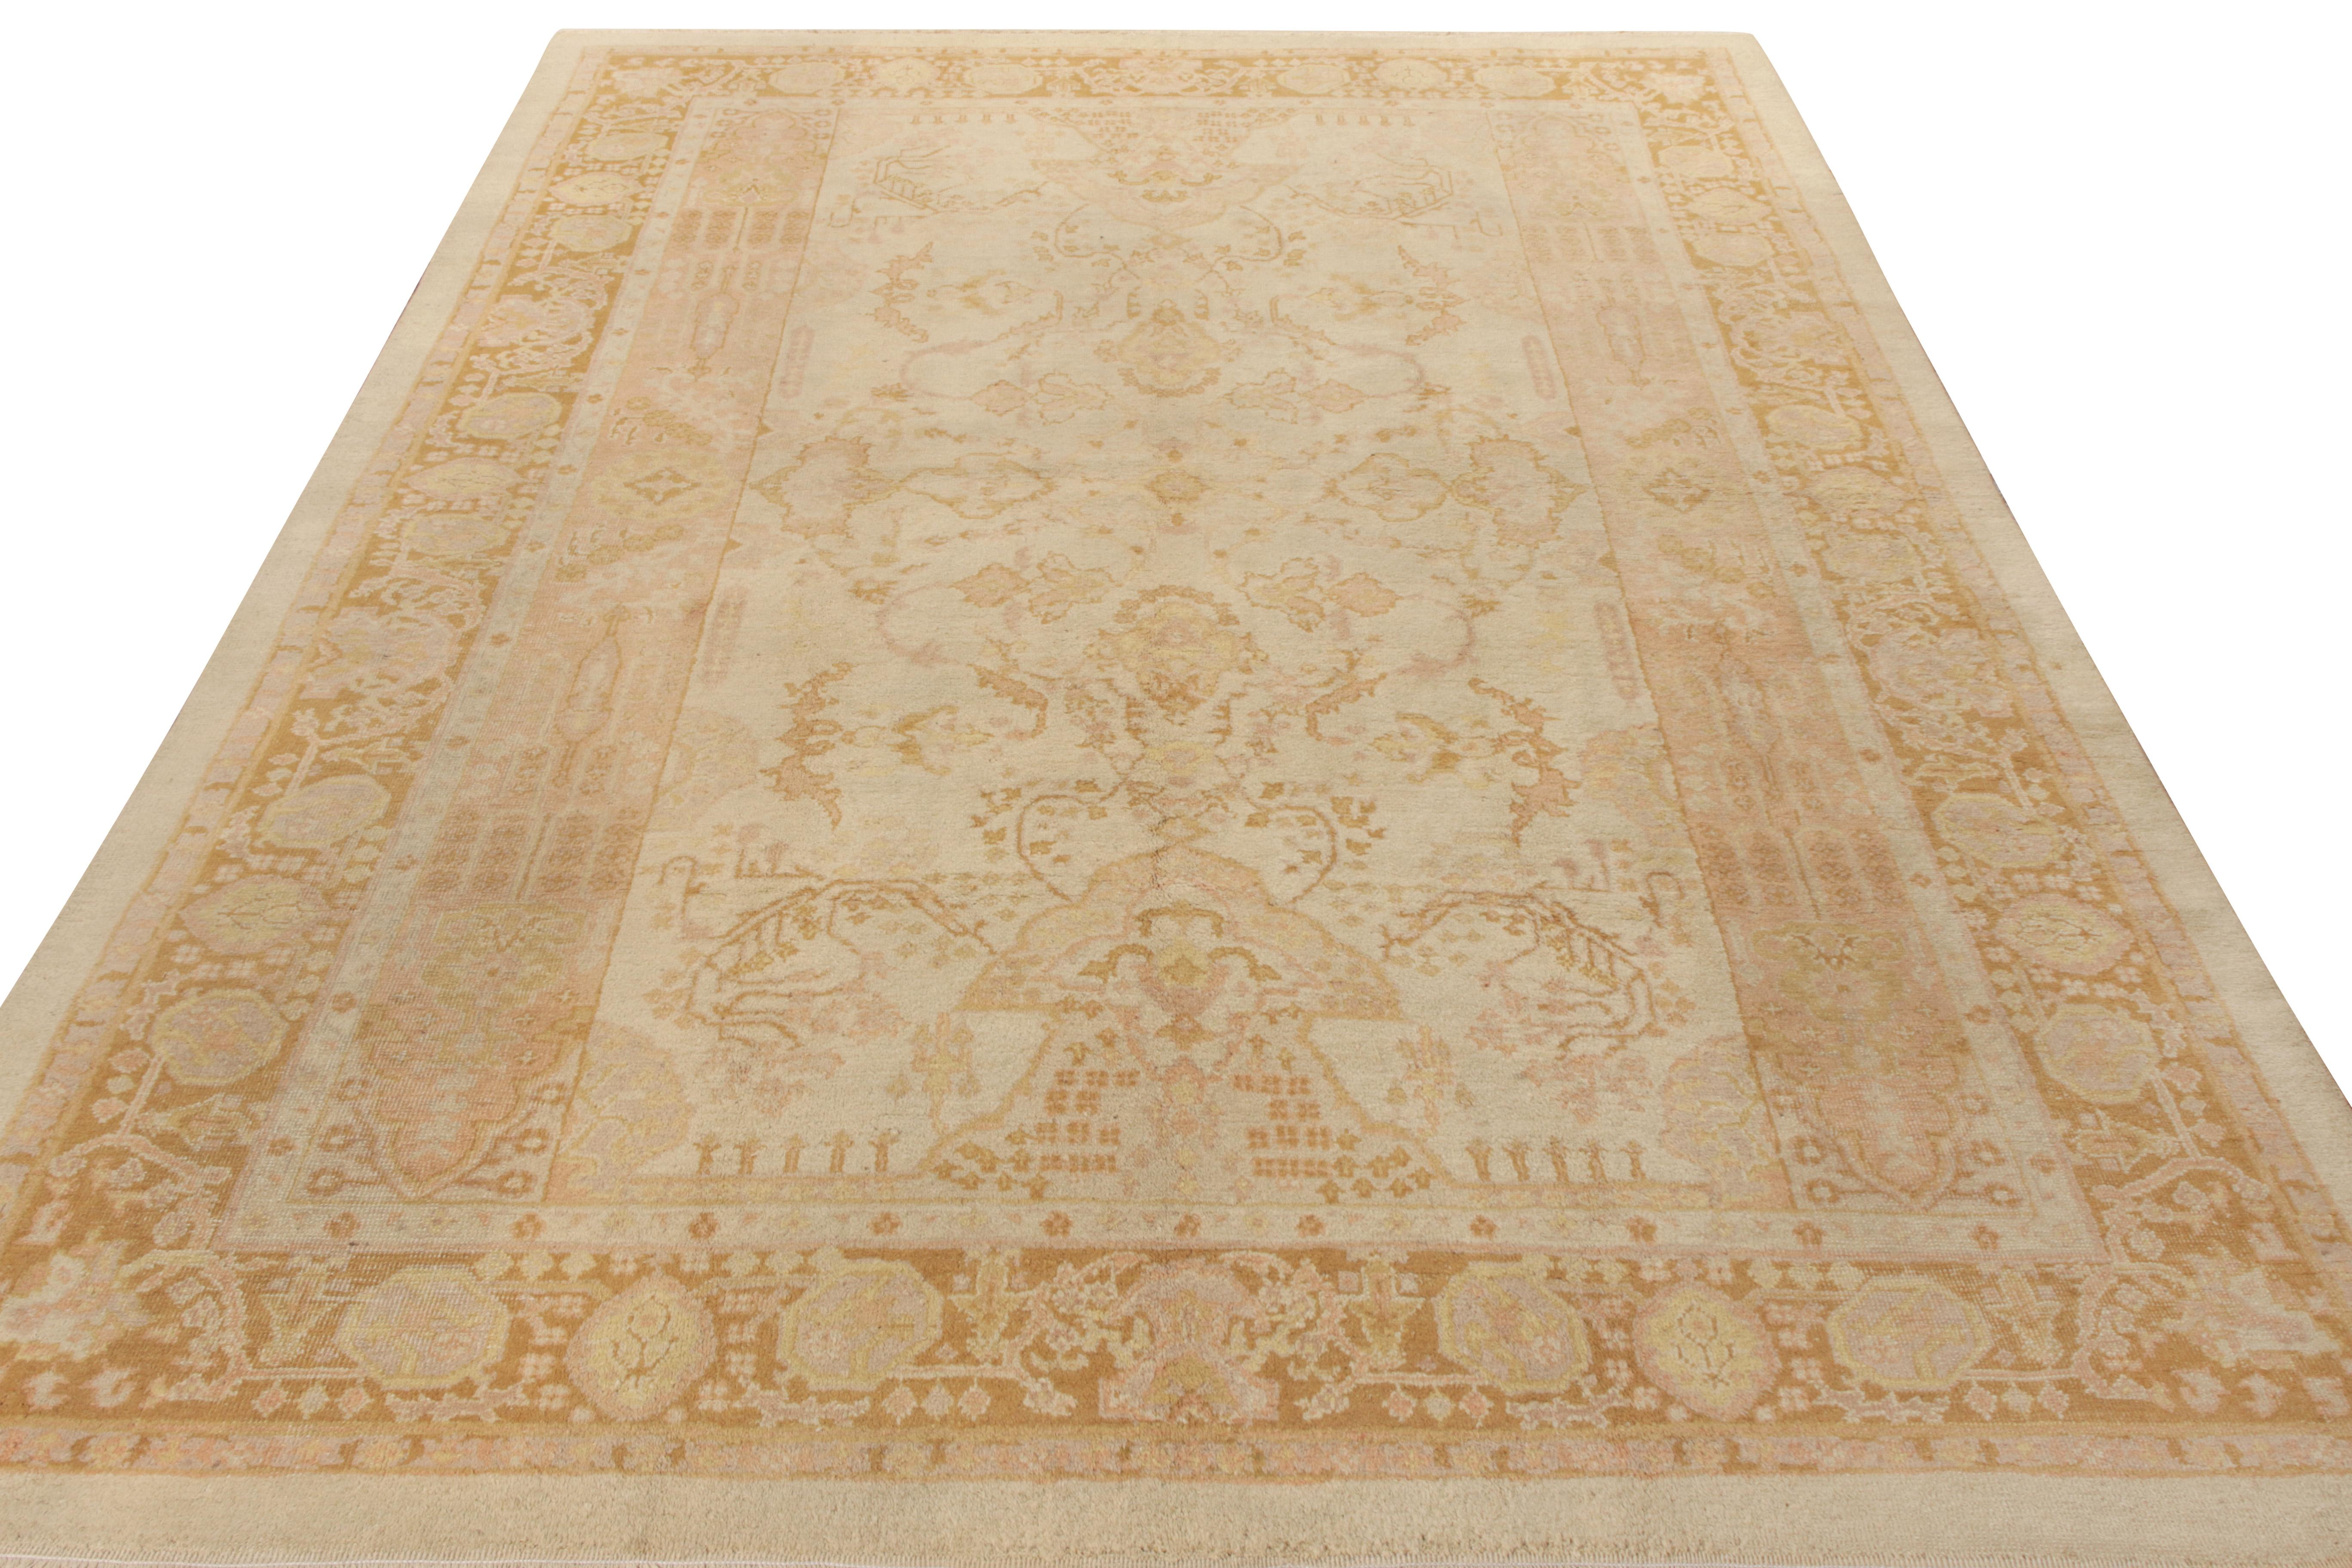 An 8x11 antique Amritsar from Rug & Kilim’s Antique & Vintage Indian rug collection. The rug originates from the colonial Indian era of the 1920s and presents itself as a masterpiece of Indian craftsmanship, bearing a subtle English influence in its